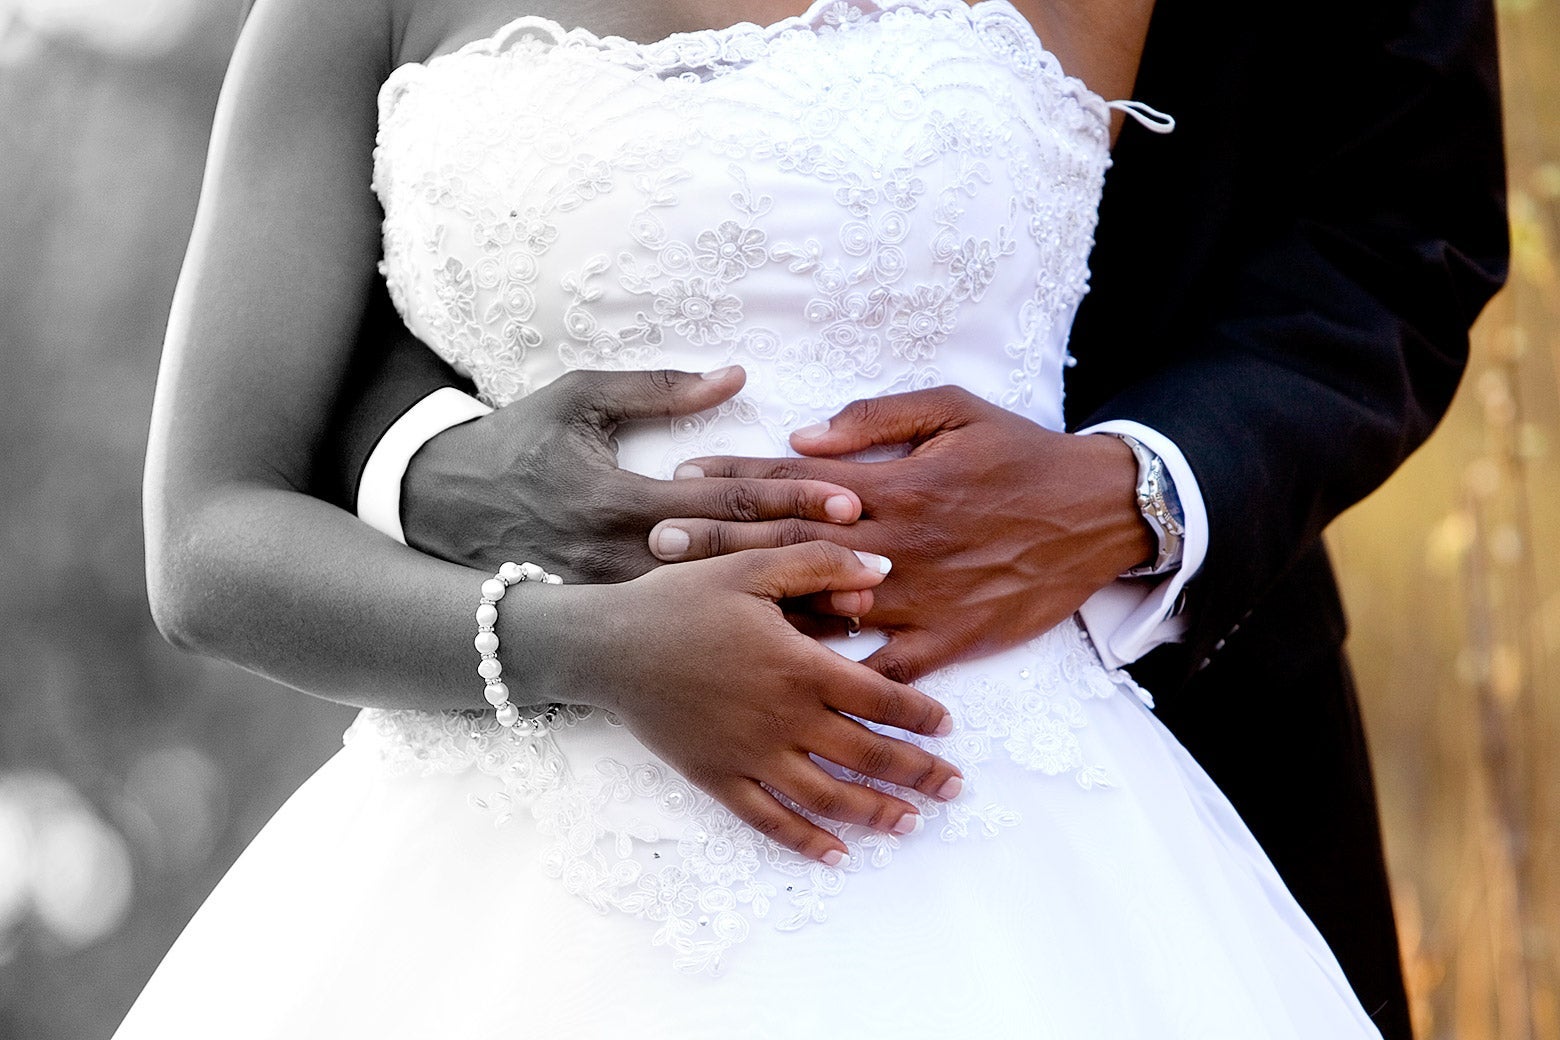 A bride and groom, with his arms wrapped around her waist. The left side of the image is greyscale, gradually transitioning to full color on the right.